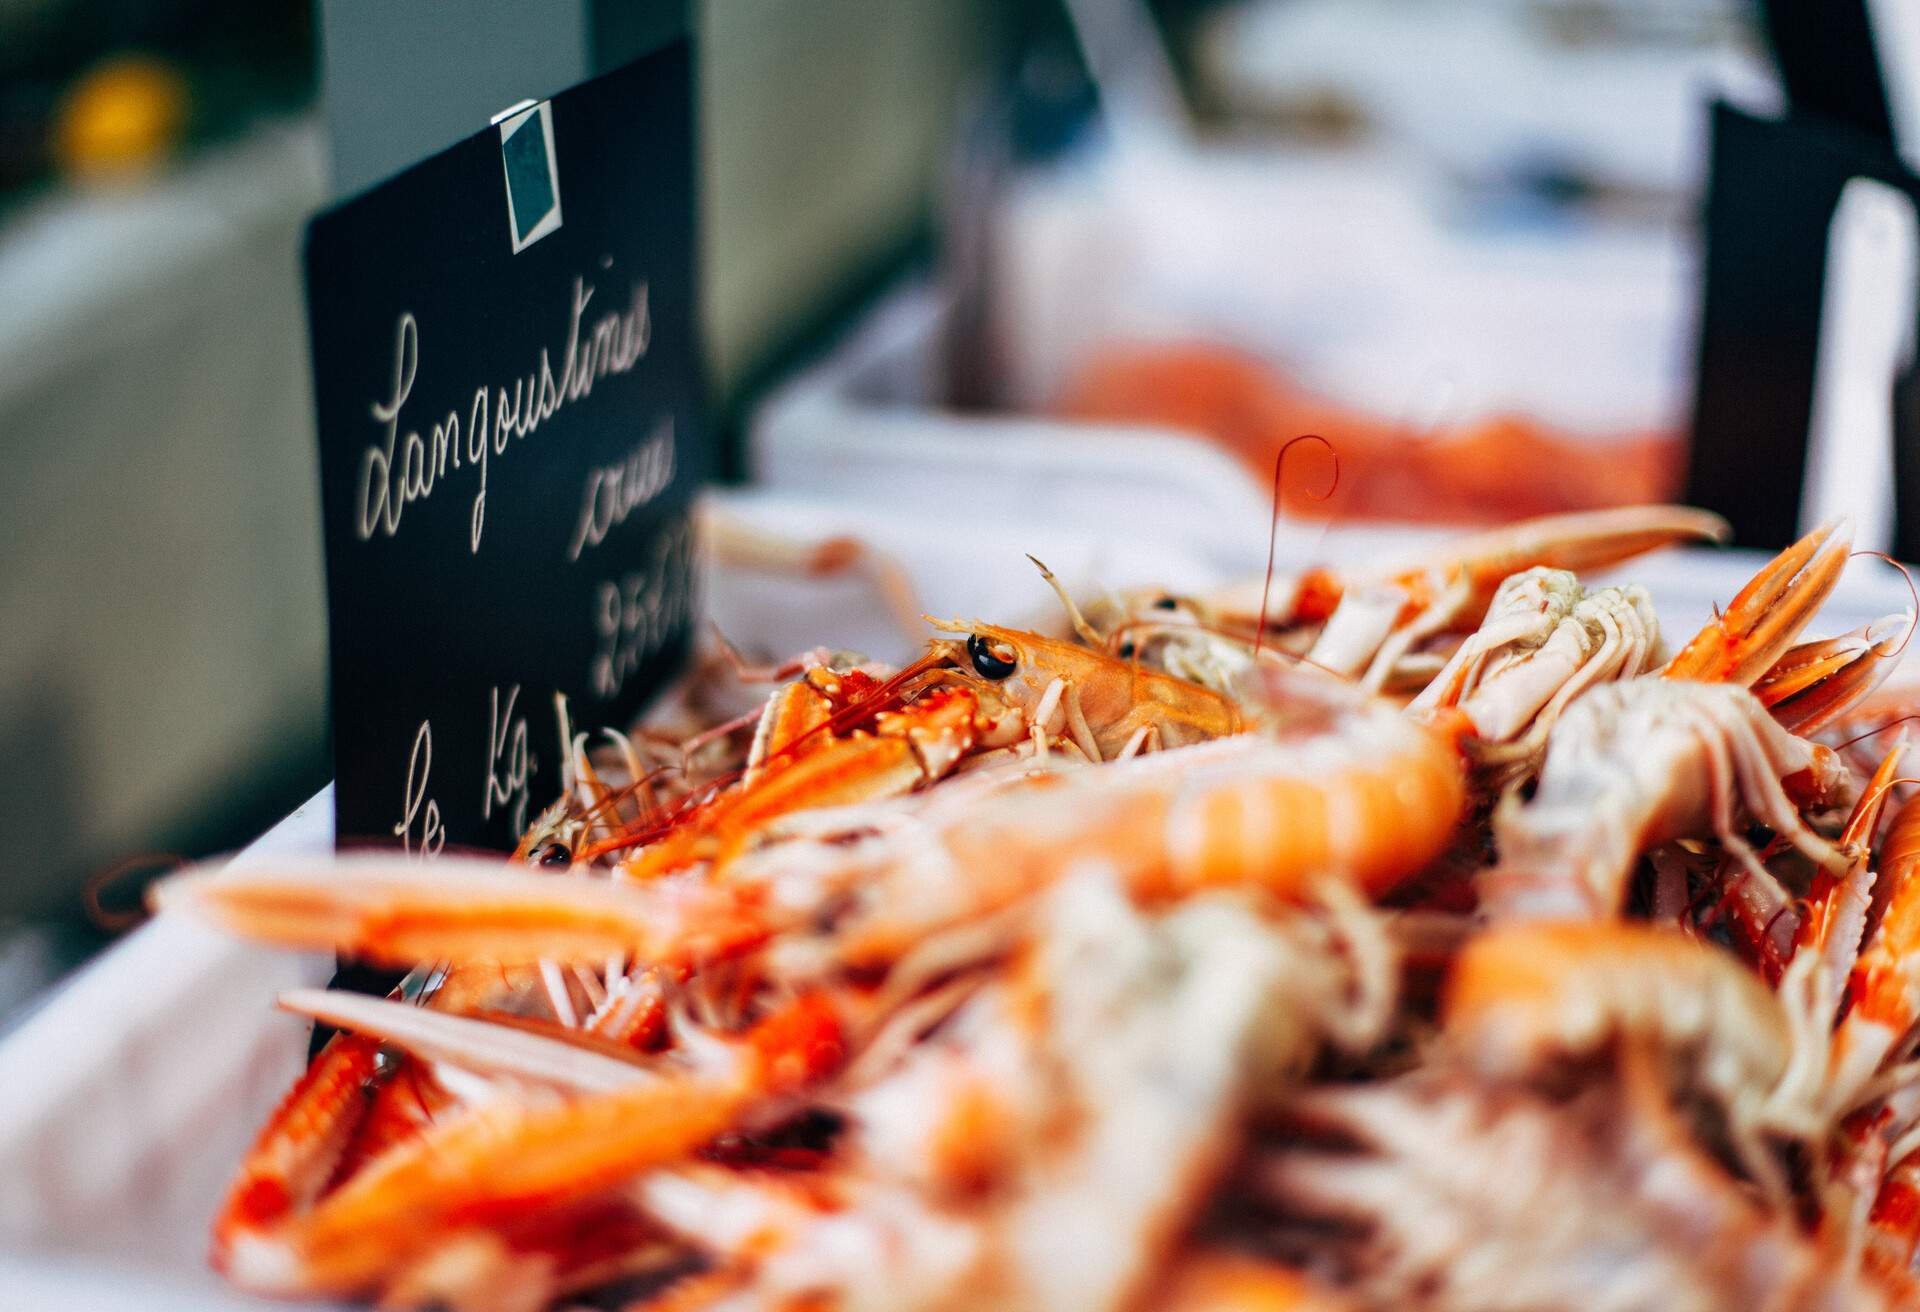 A display of cooked langoustines with a sign.